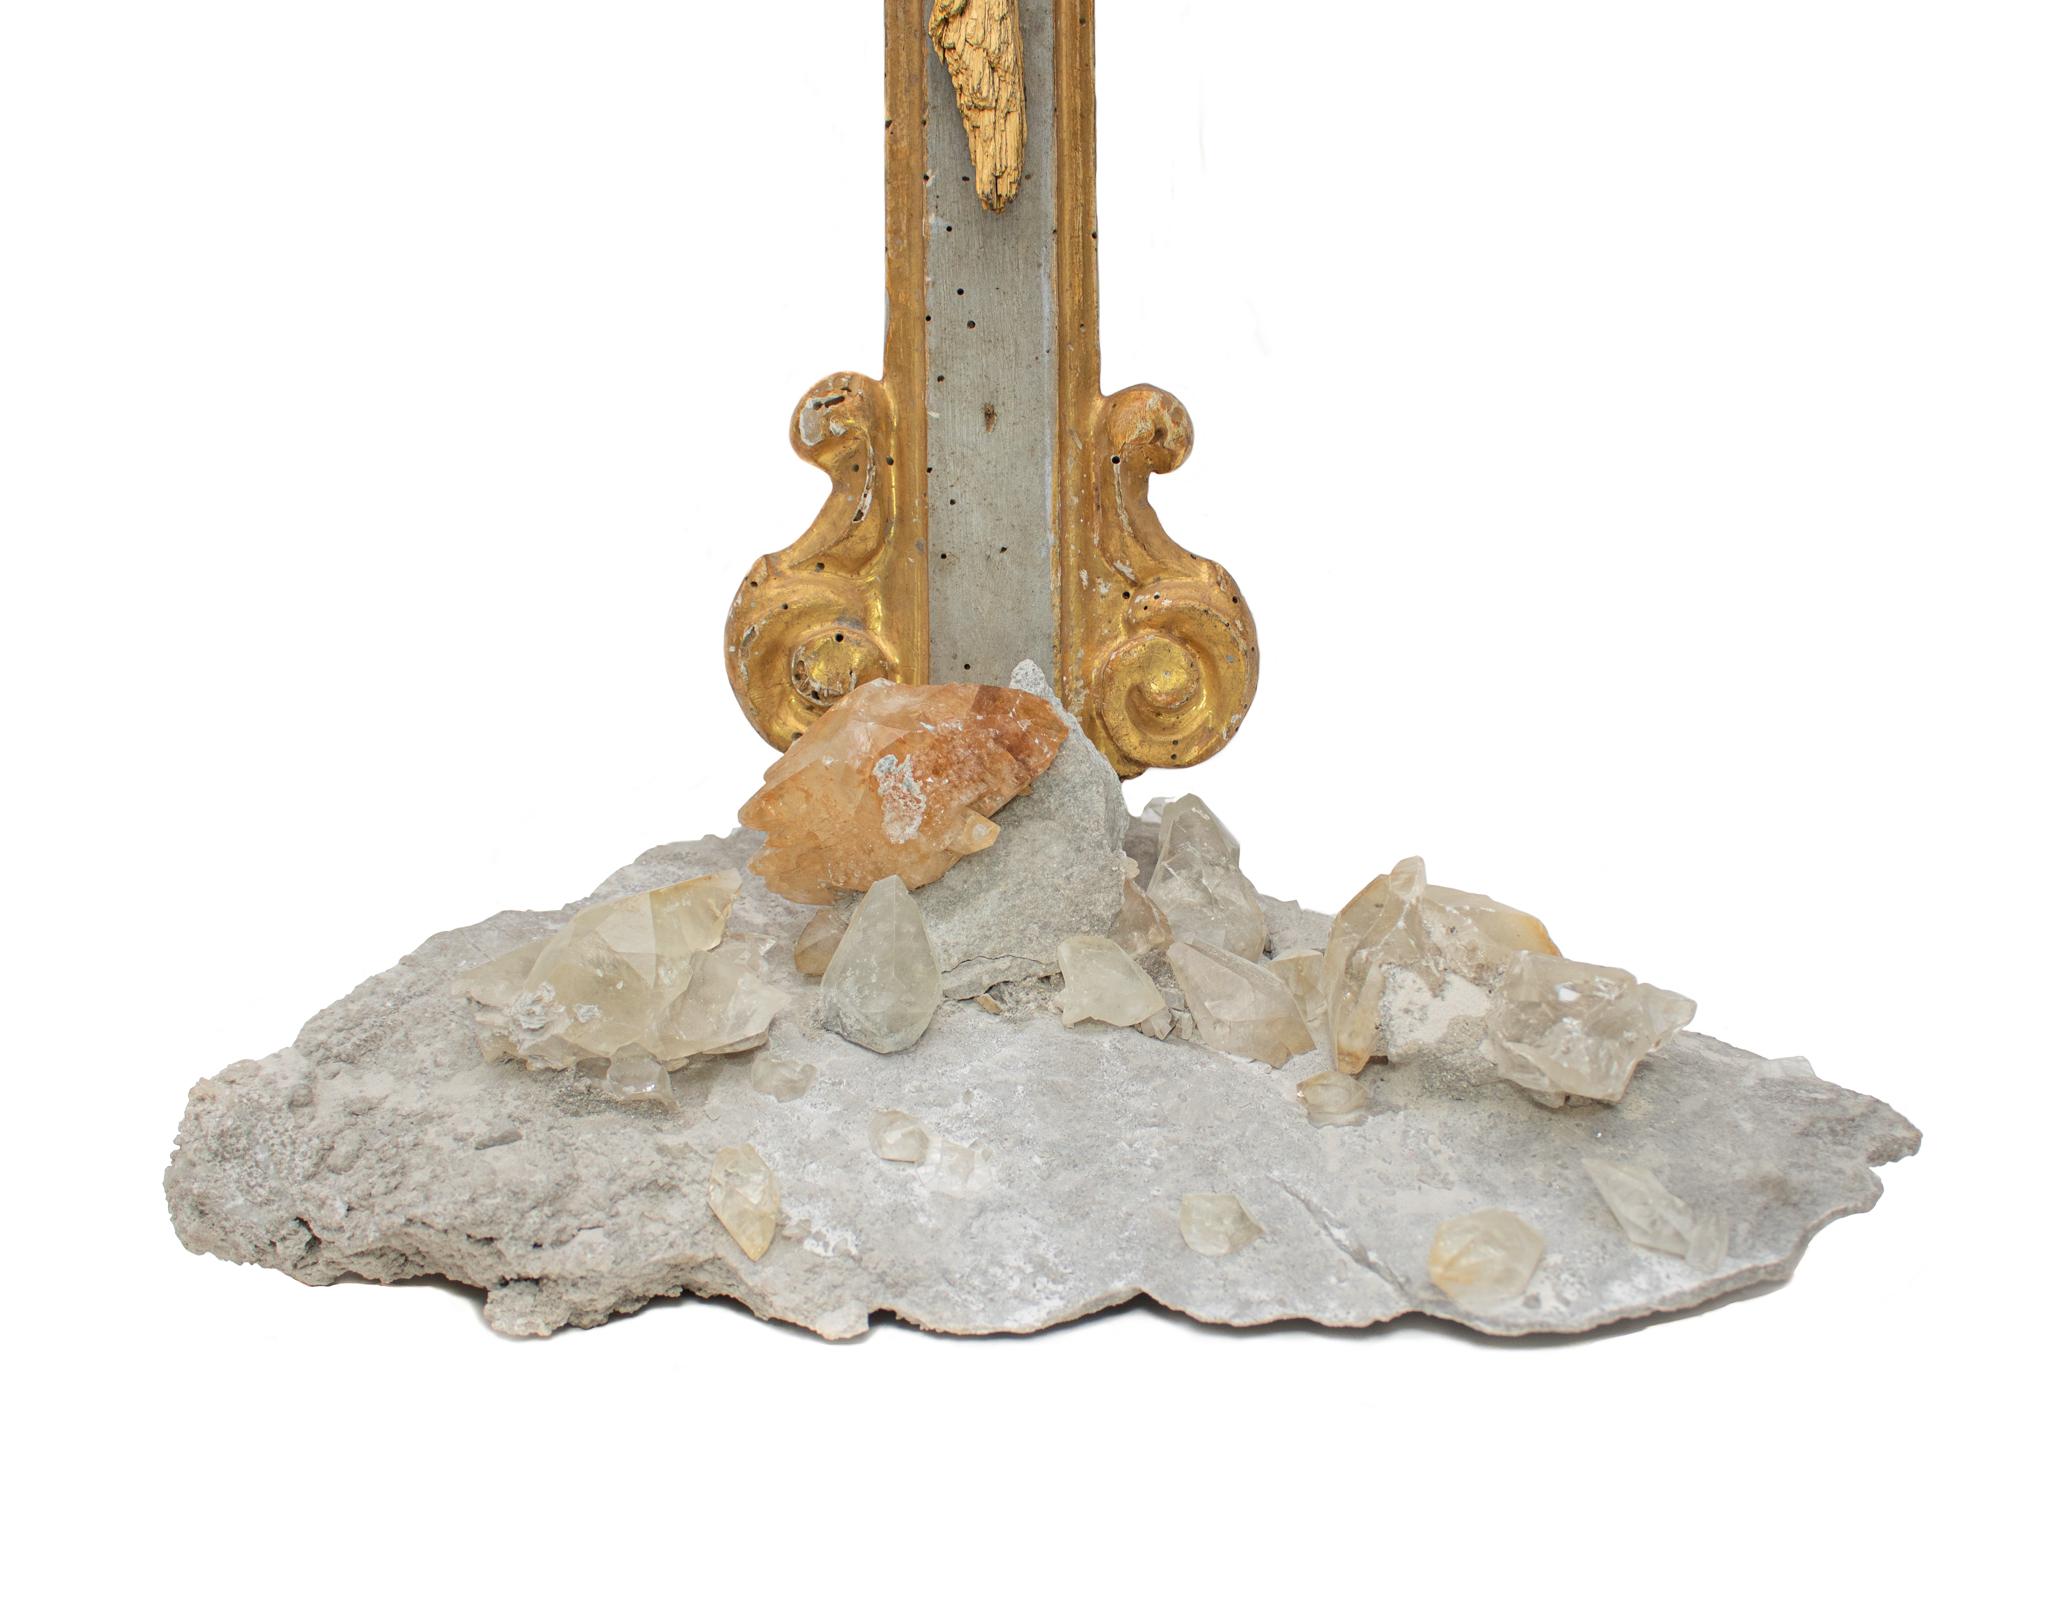 18th century Italian crucifix with gold-plated kyanite, calcite crystals in matrix, and baroque pearls. The crucifix is originally from a church in Liguria. It is hand-carved and painted with grey pigments and the sunburst and details are gold